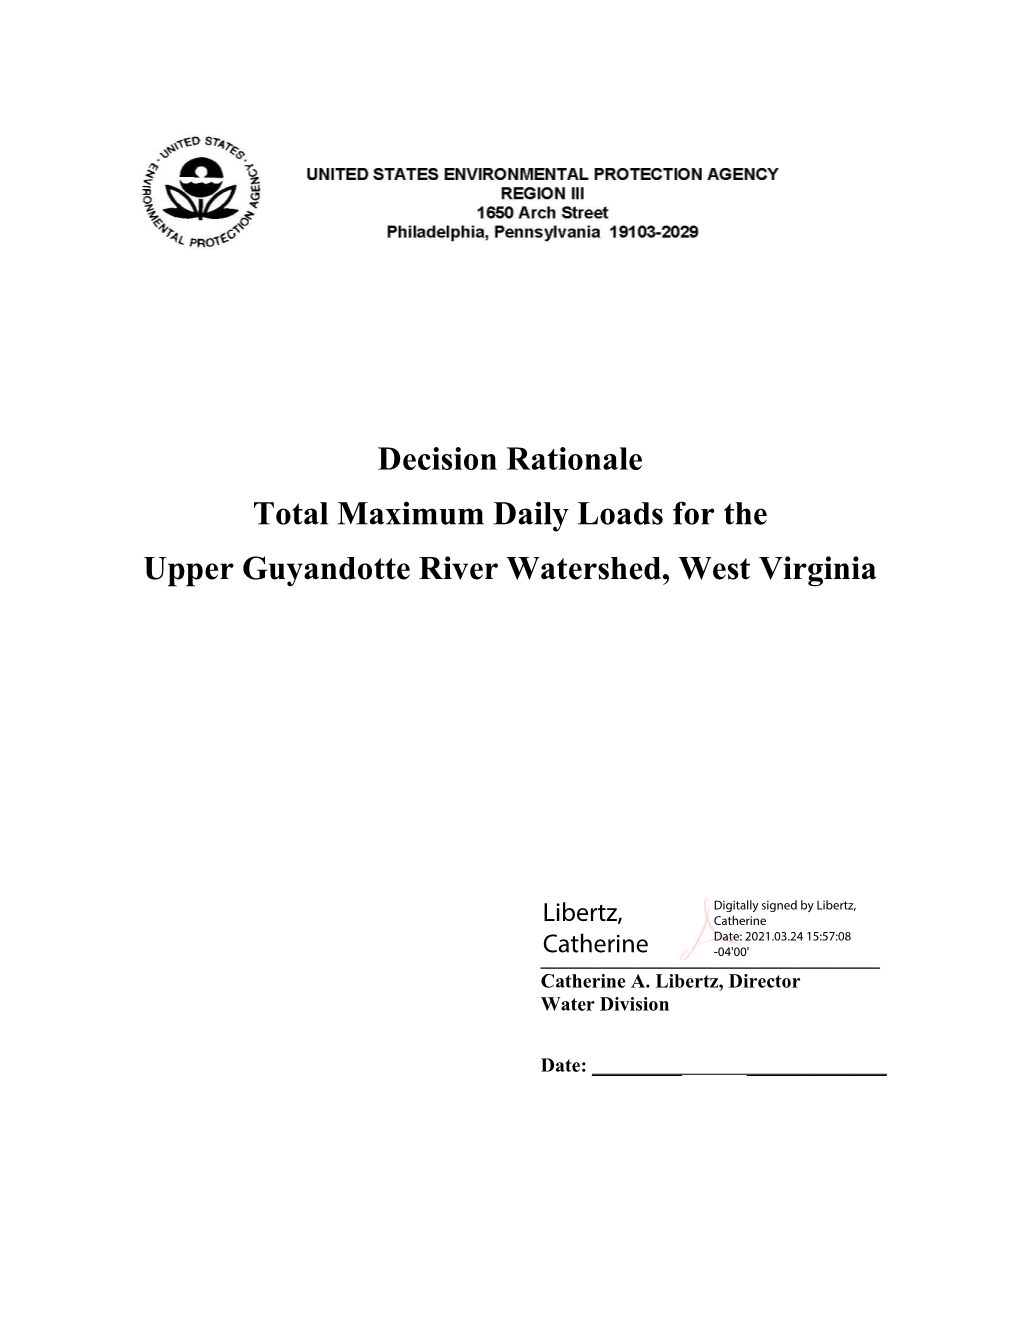 Decision Rationale Total Maximum Daily Loads for the Upper Guyandotte River Watershed, West Virginia